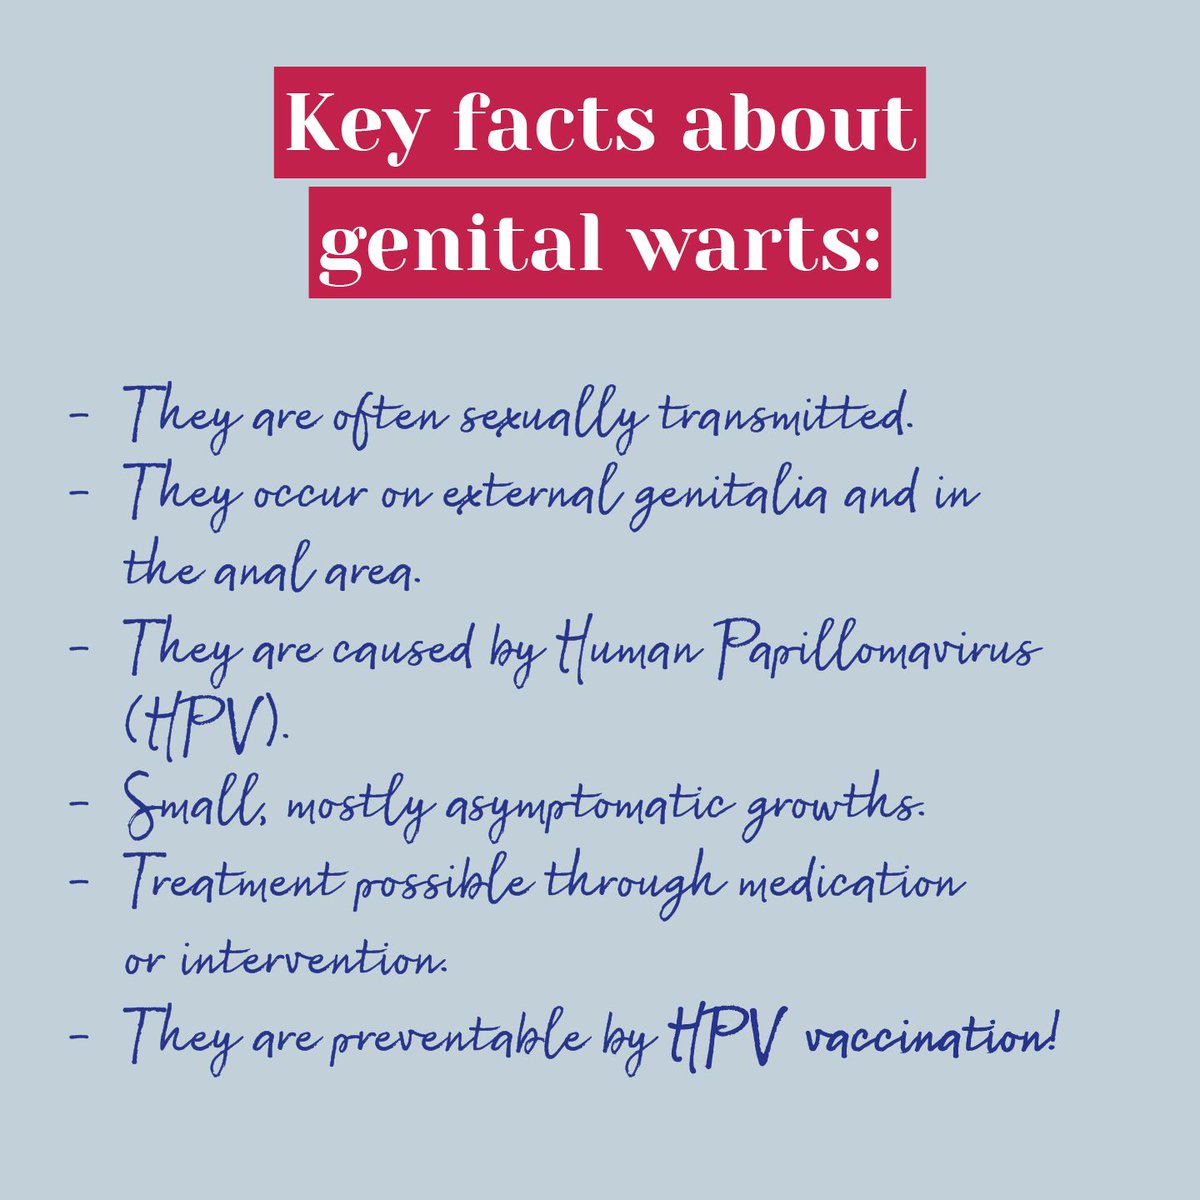 Did you know? Genital warts, caused by Human Papillomavirus (HPV), are common sexually transmitted infections. Learn about Condylomata acuminata, its causes, and preventive measures. Protect yourself through the HPV vaccination! #Gynecology #Health #HPV #GenitalWarts #Prevention